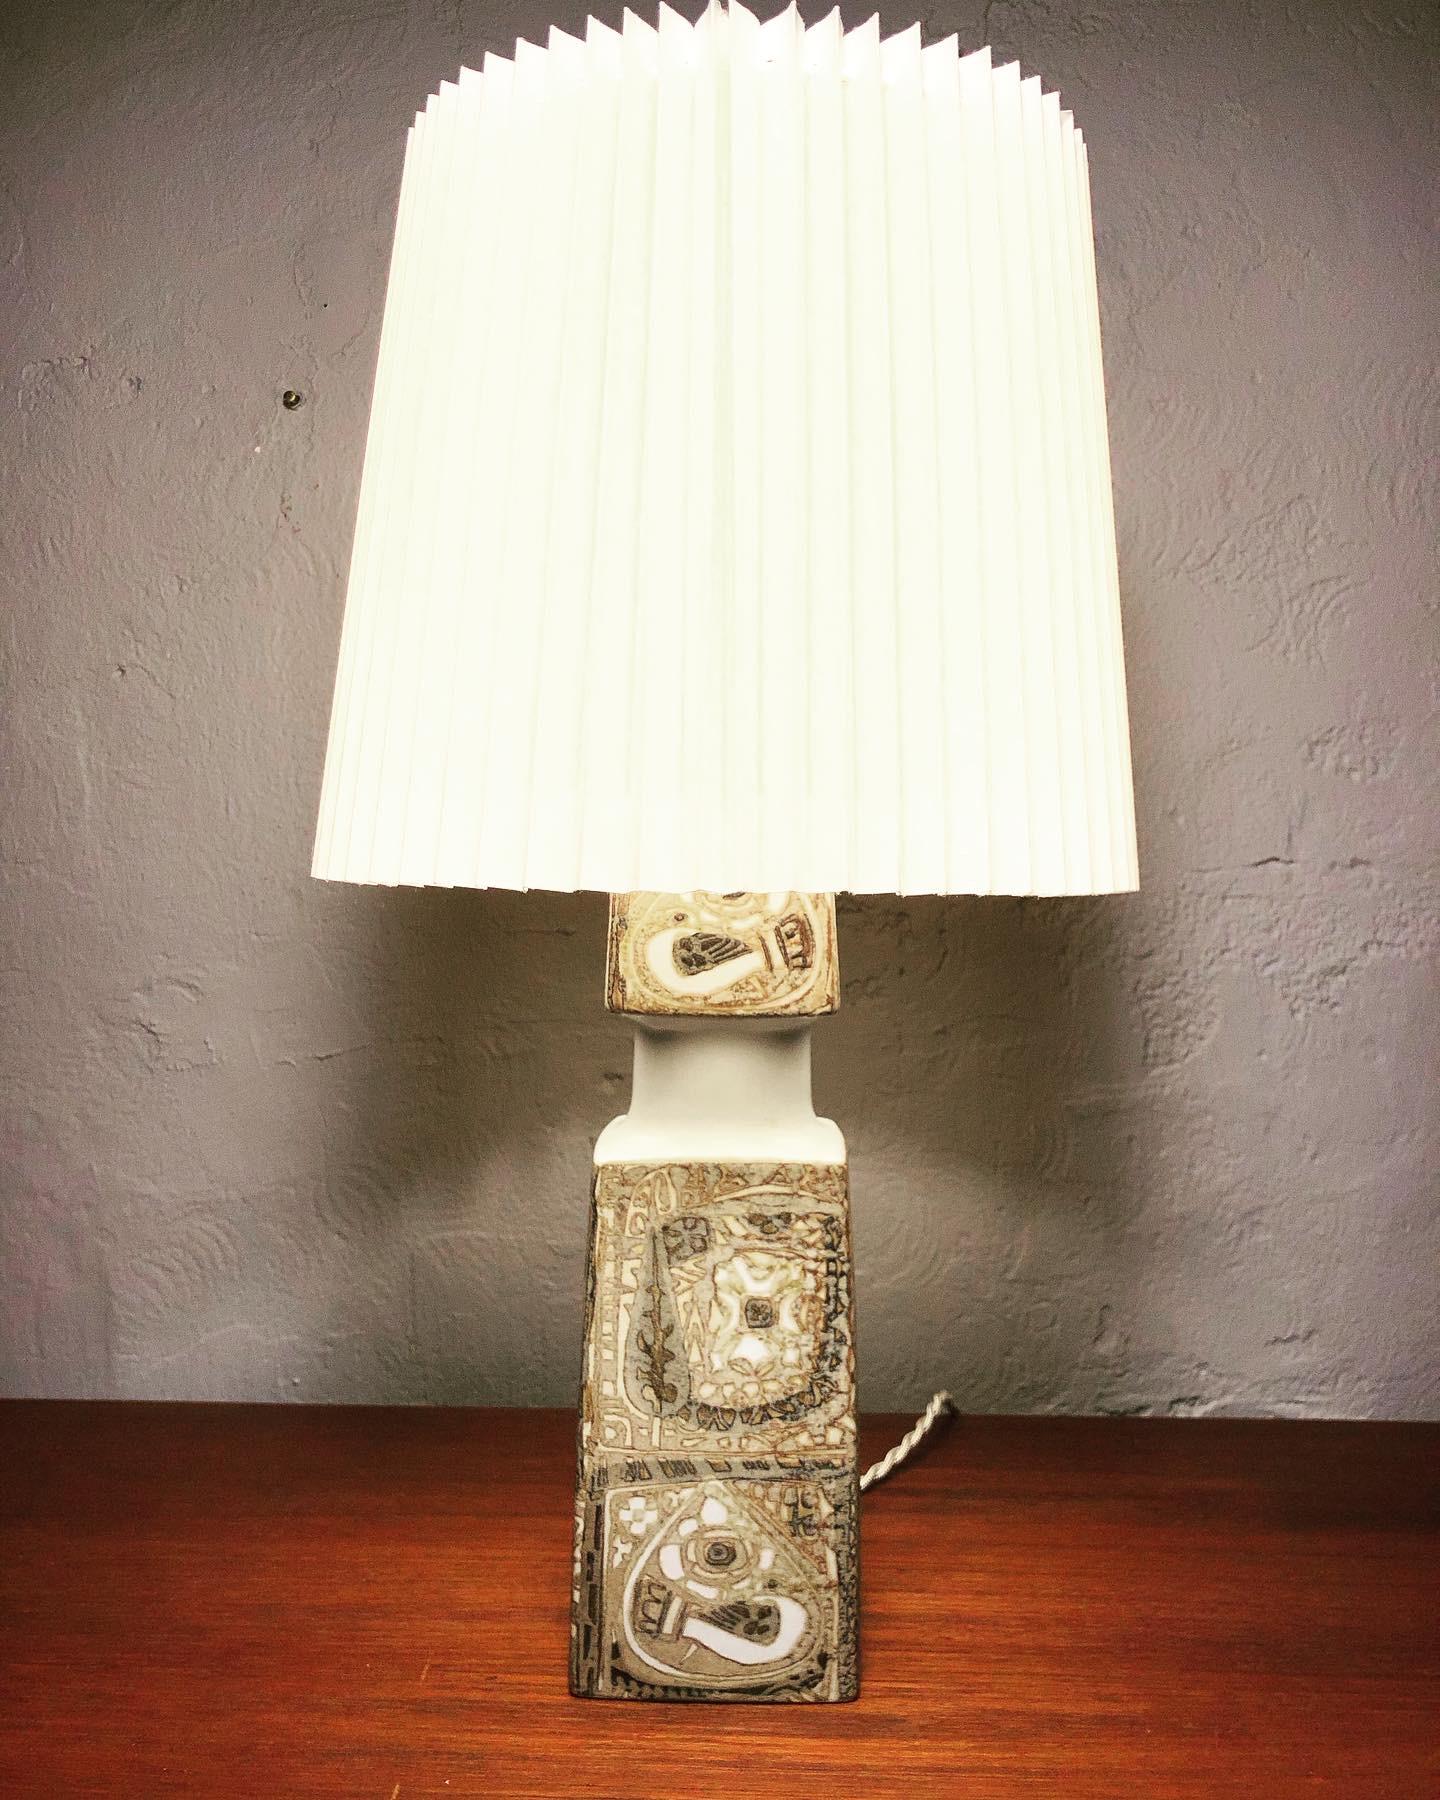 Danish A Classic Mid Century Ceramic Table Lamp By Nils Thorssen For Fog And Mørup  For Sale